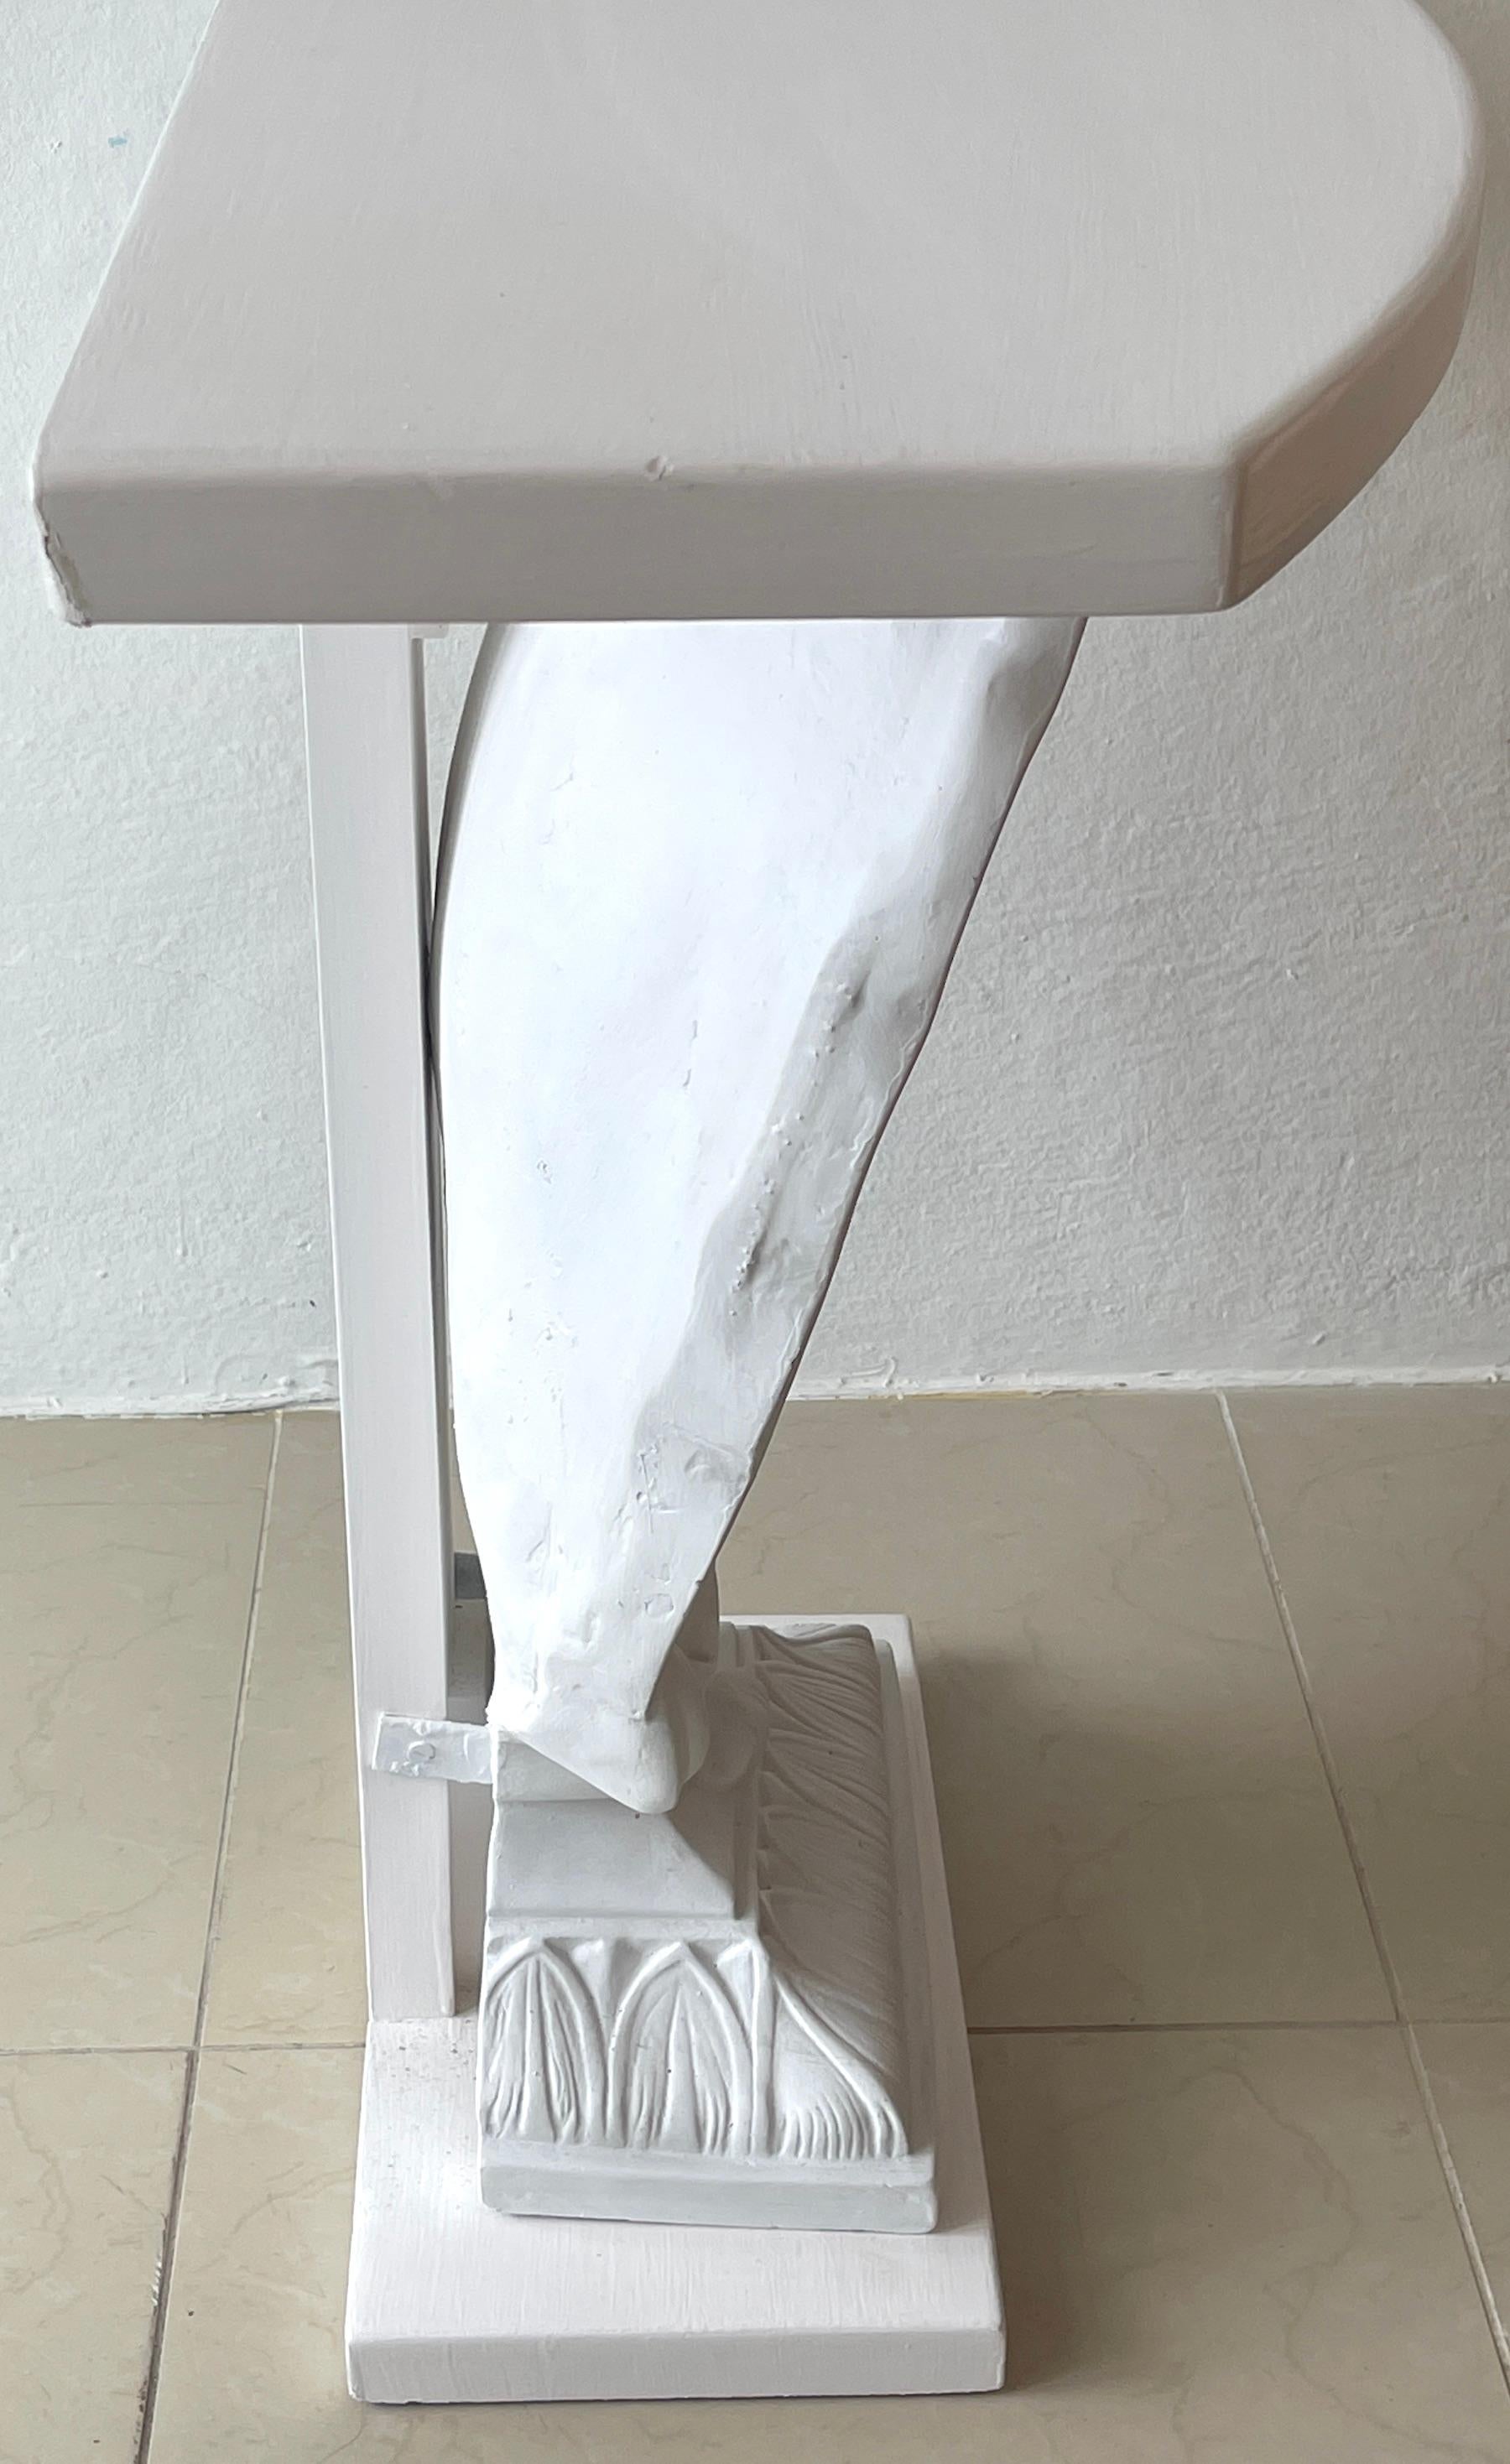 Composition White Lacquered Shell Console by Grosfeld House, Restored